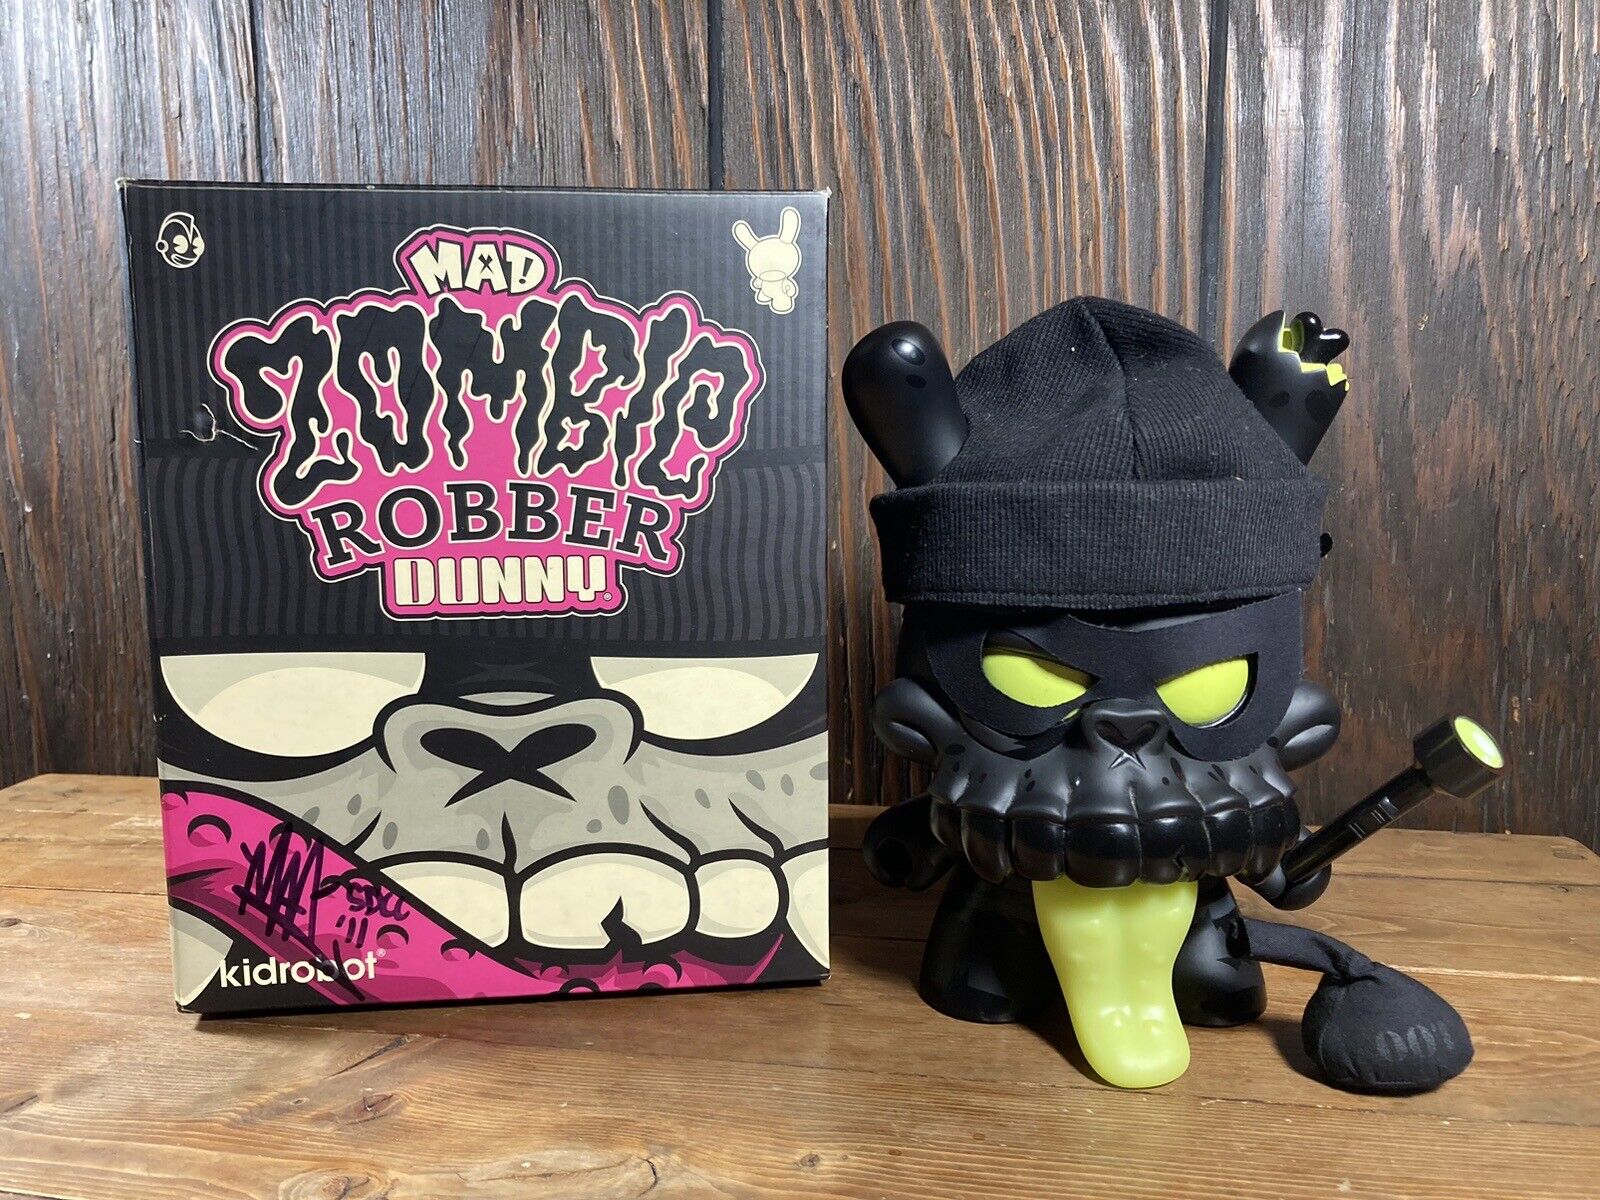 Kidrobot MAD Zombie Robber Dunny SDCC 2011 8” Vinyl Toy Signed